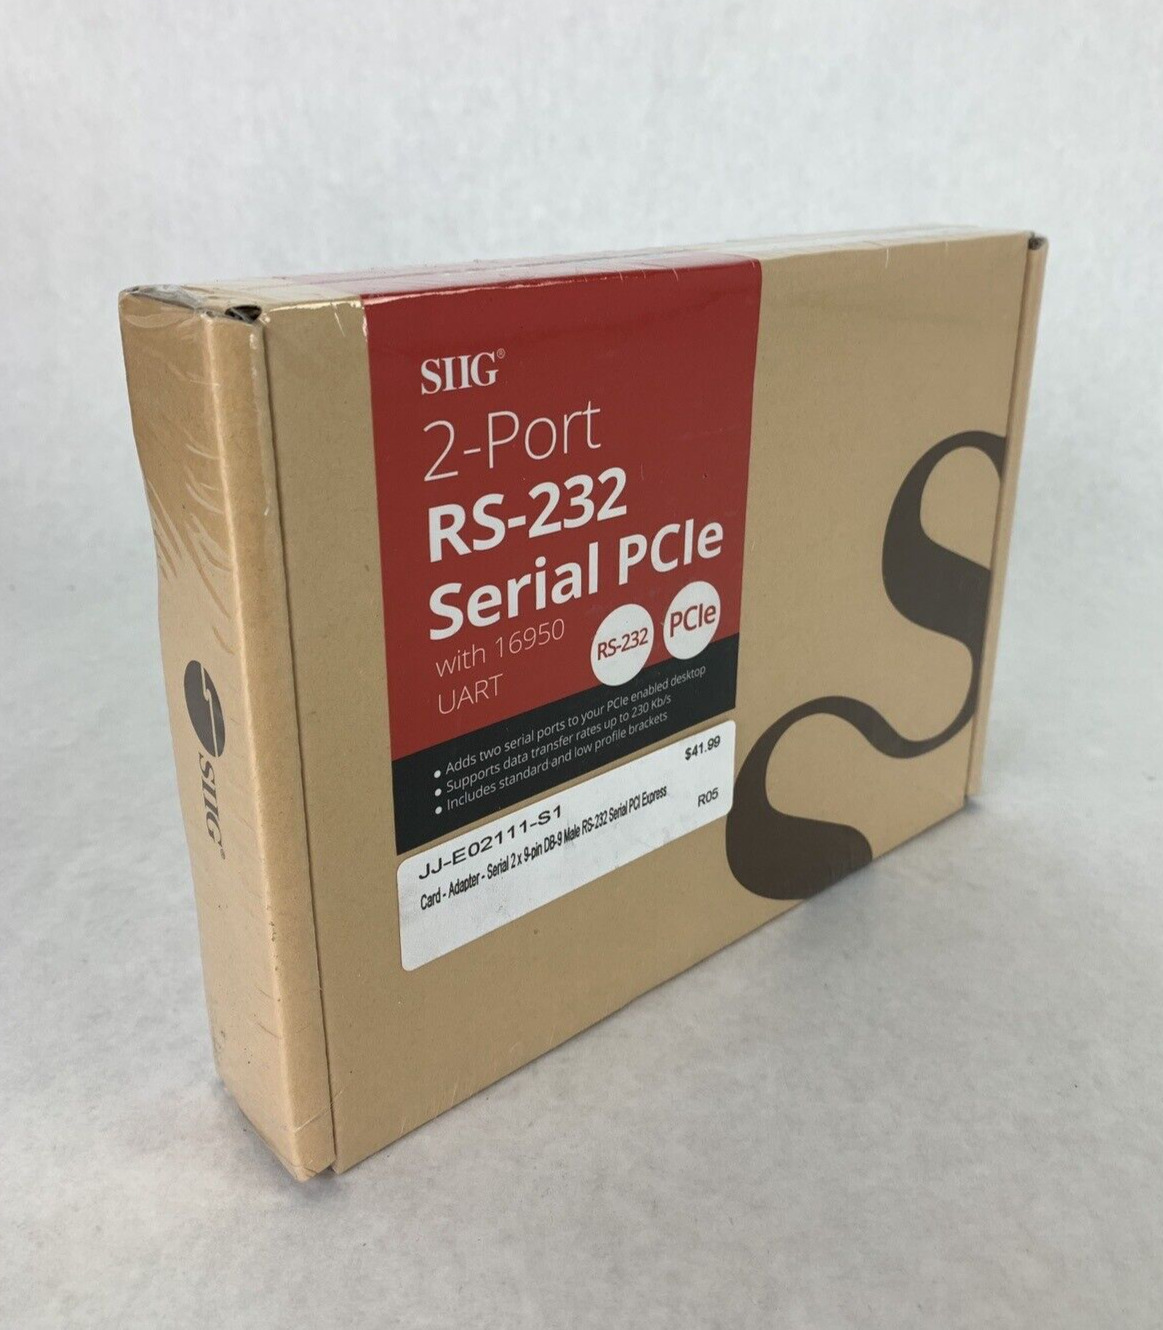 New SIIG 2-Port Serial PCIe 550-Value RS-232